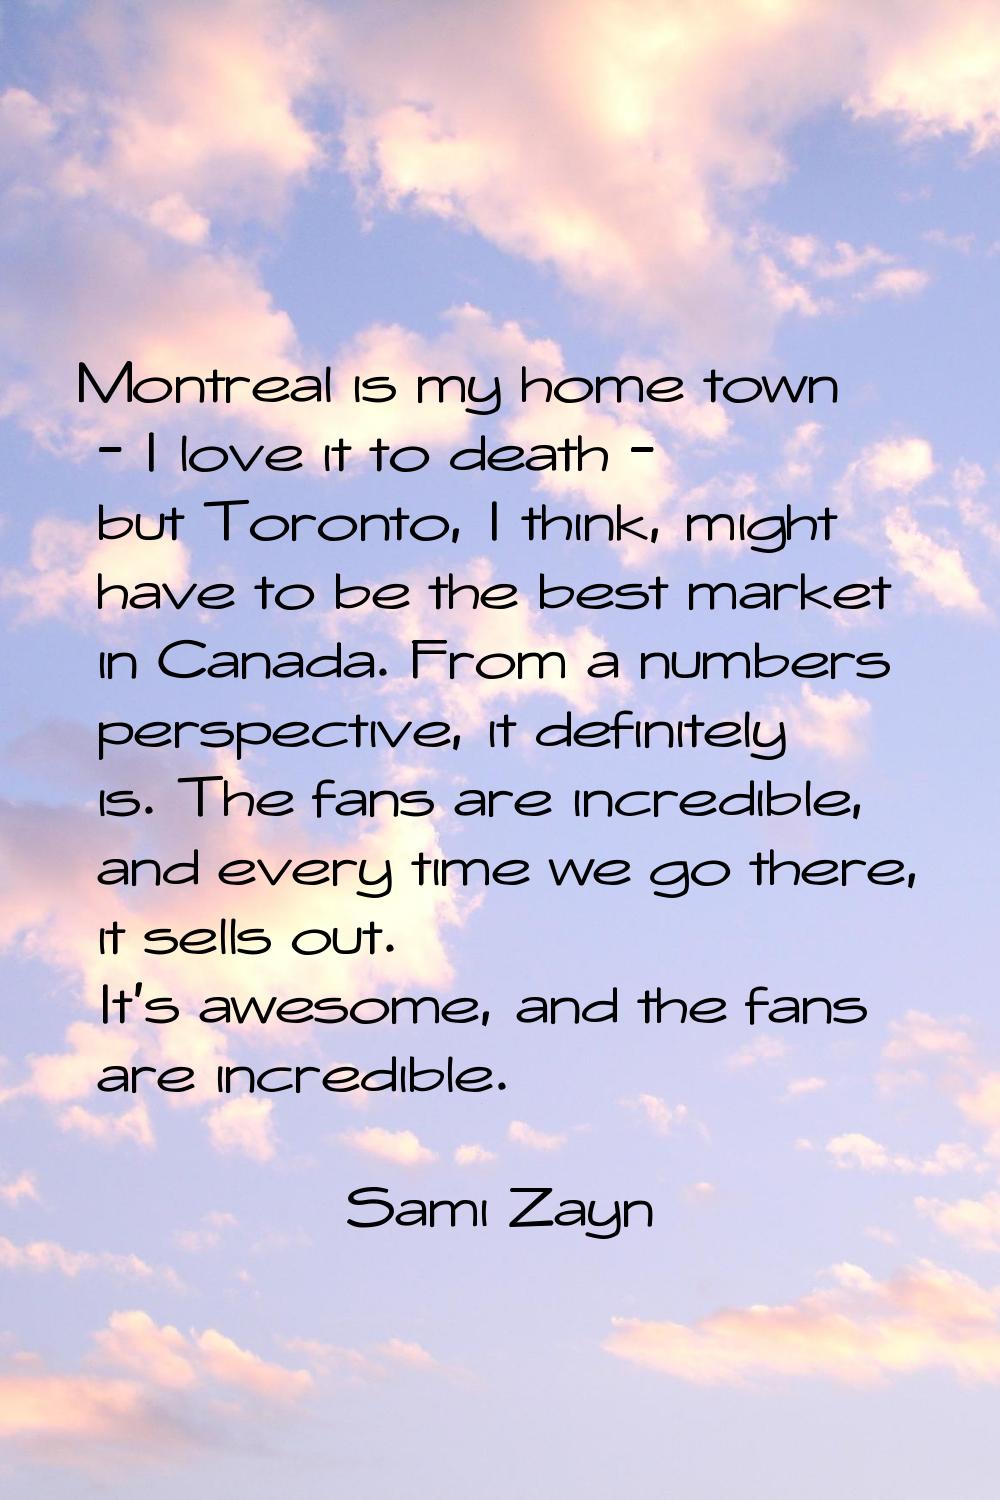 Montreal is my home town - I love it to death - but Toronto, I think, might have to be the best mar